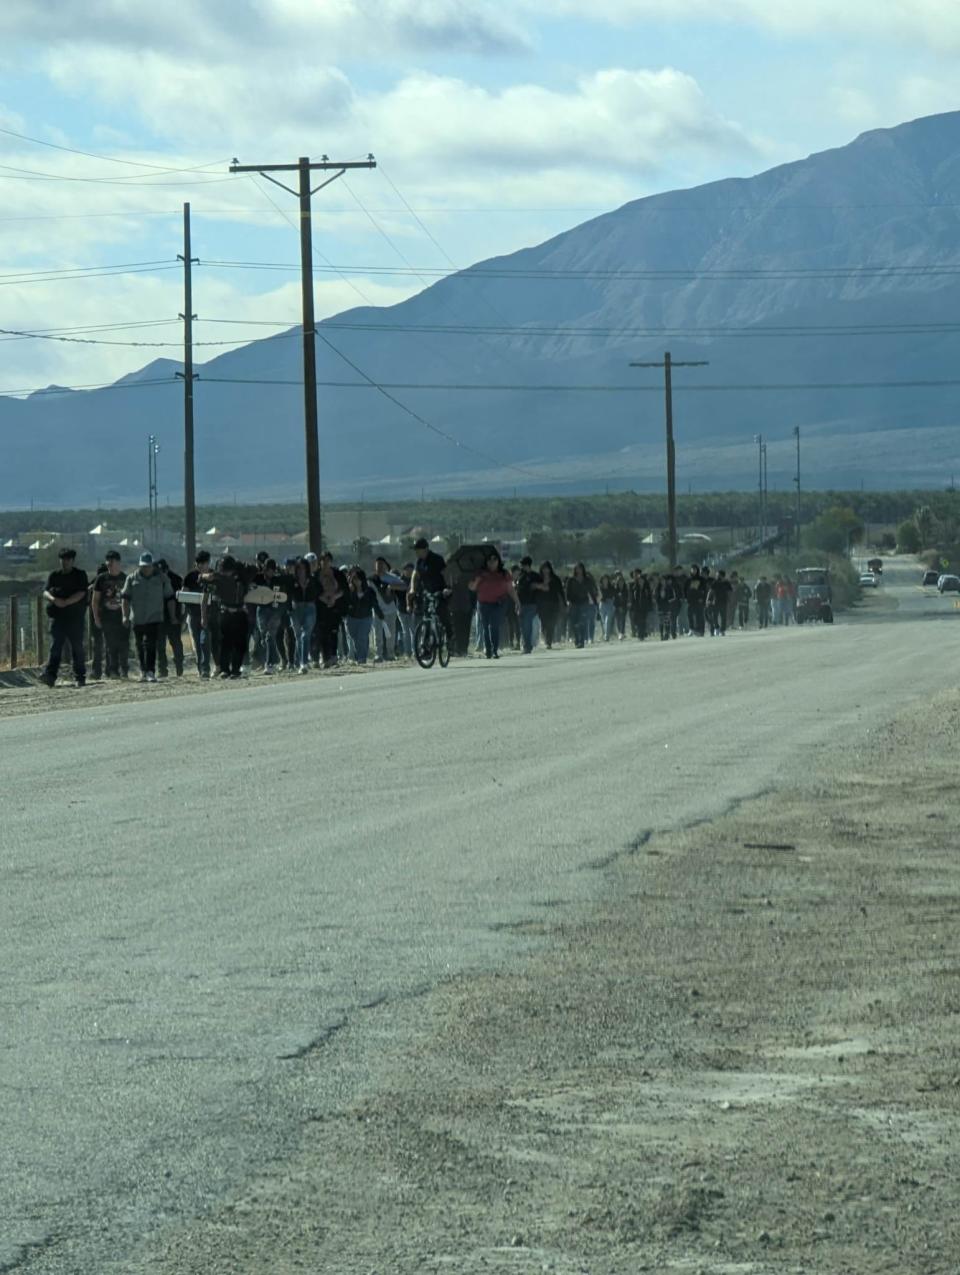 About 100 students from Desert Mirage High School march six miles to the Coachella Valley Unified School District headquarters to protest school security issues and teacher pay on Feb. 28. As they walked, their high school and two adjacent campuses went on lockdown for two hours after a student turned in to administrators a gun magazine loaded with bullets.